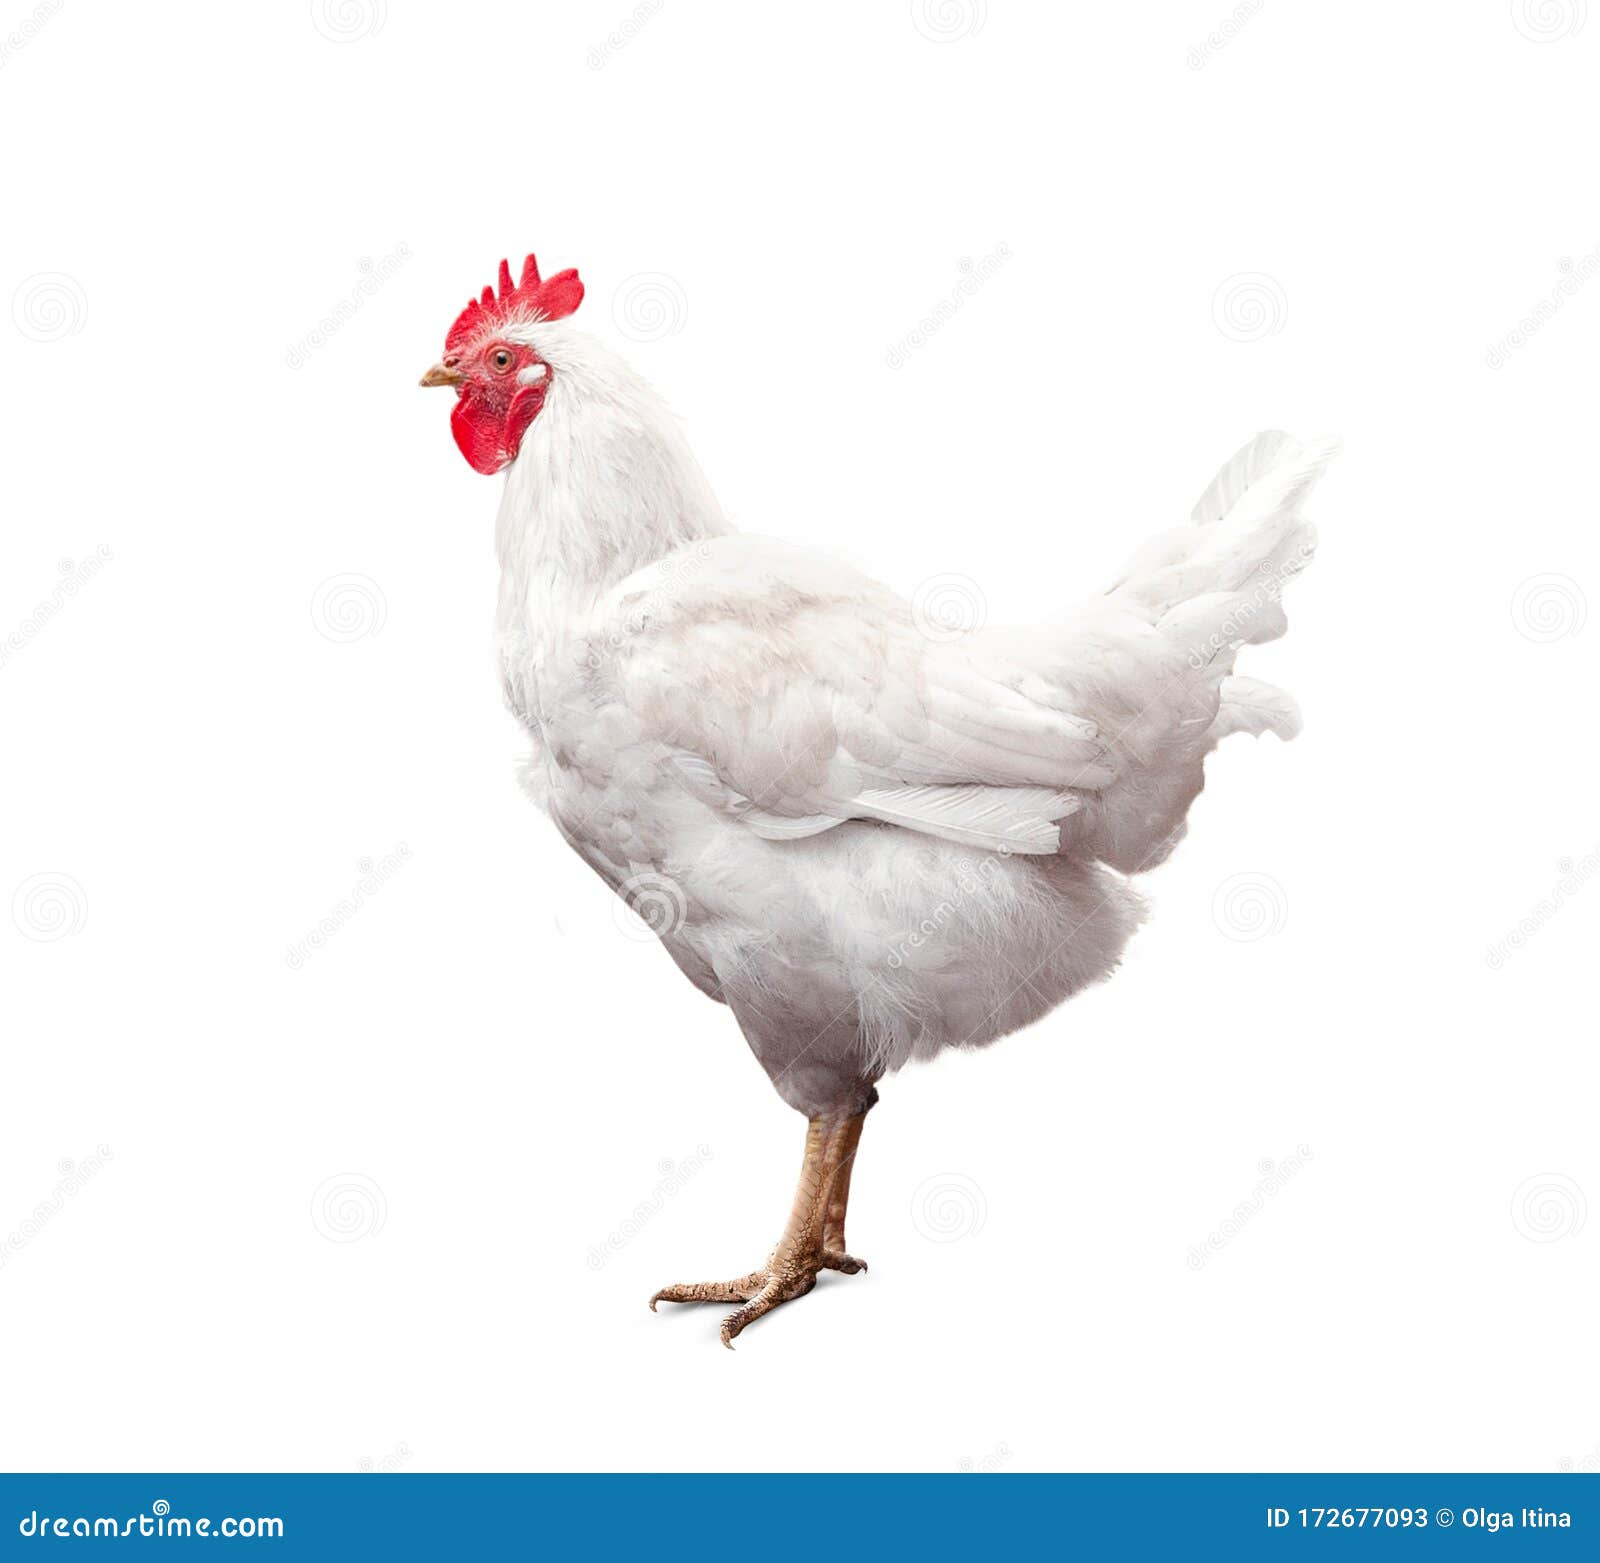 White Rooster Isolated on White Background Stock Image - Image of ...